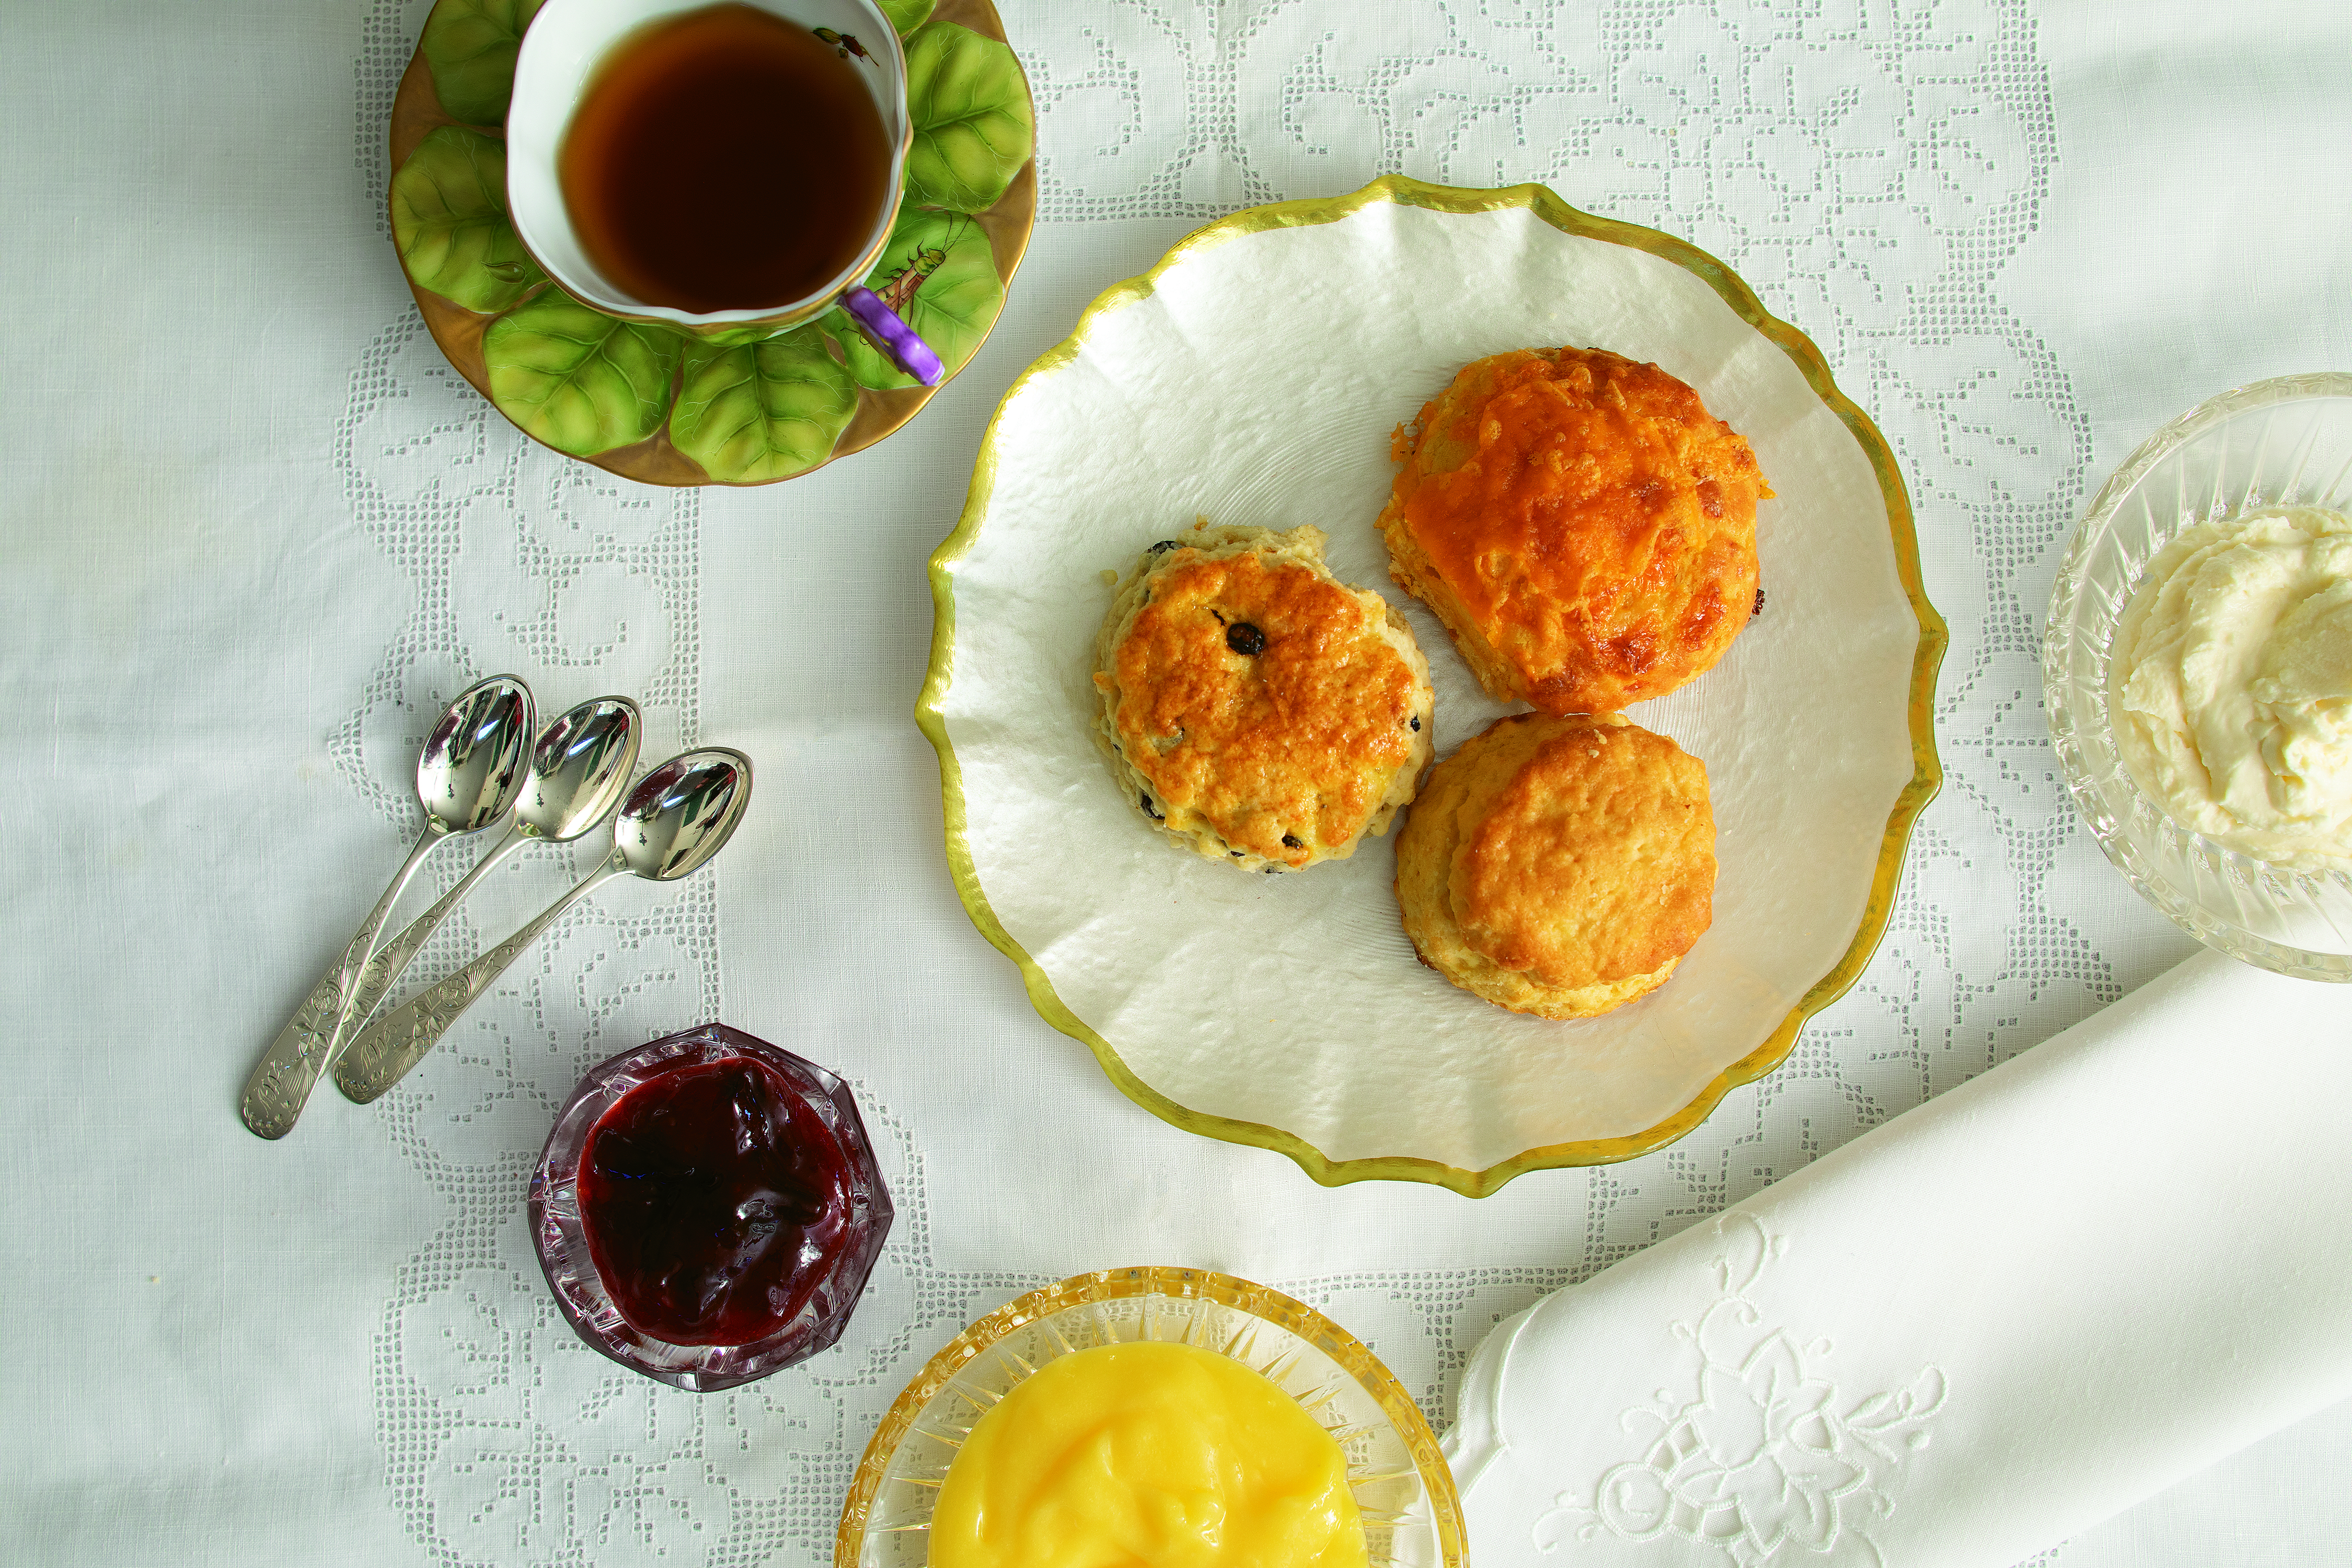 Sumptuous cheese, plain, and currant scones are served with clotted cream, luscious lemon curd, and strawberry plum jam. Hand-painted Anna Weatherly cup and saucer, plate and jam bowl from non(e)such.